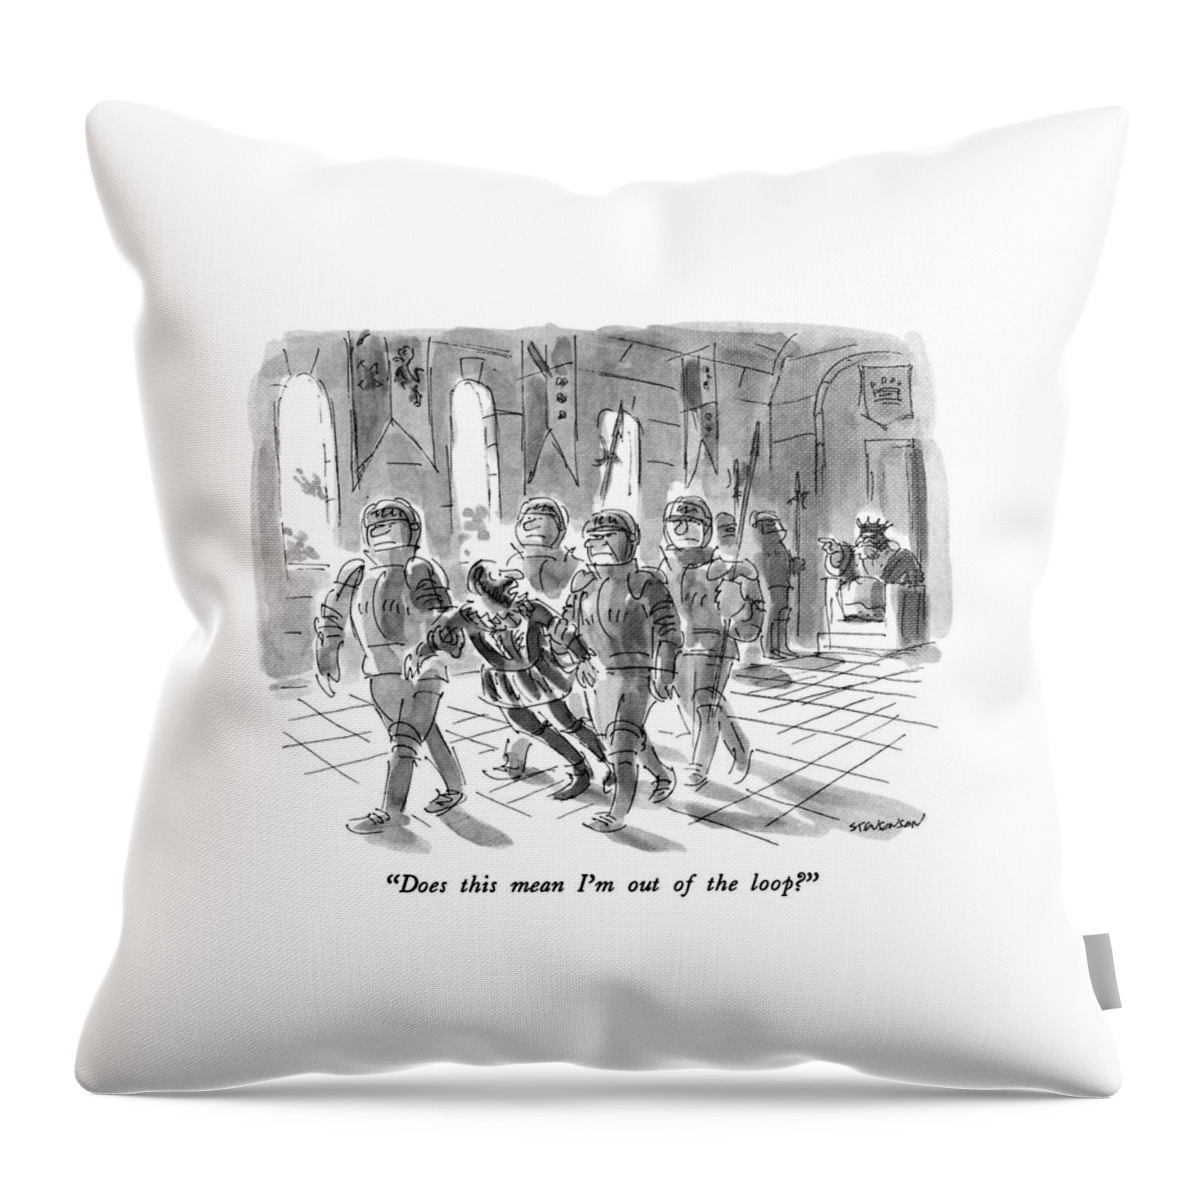 Does This Mean I'm Out Of The Loop? Throw Pillow